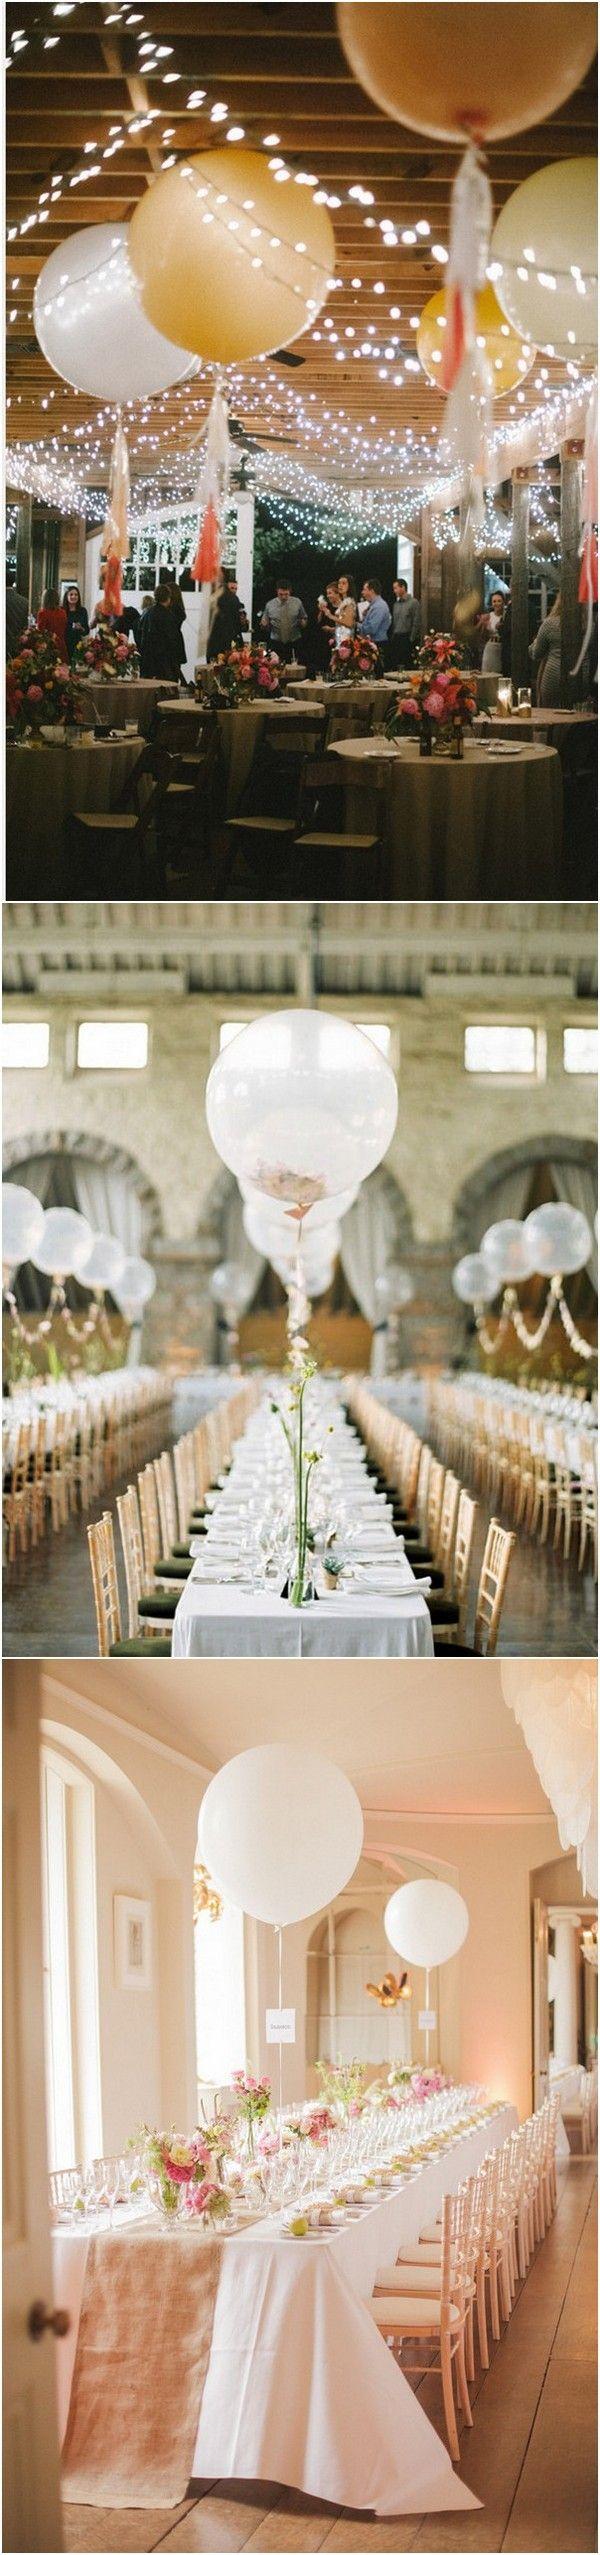 Wedding - 18 Awesome Wedding Ideas To Use Balloons - Page 2 Of 2